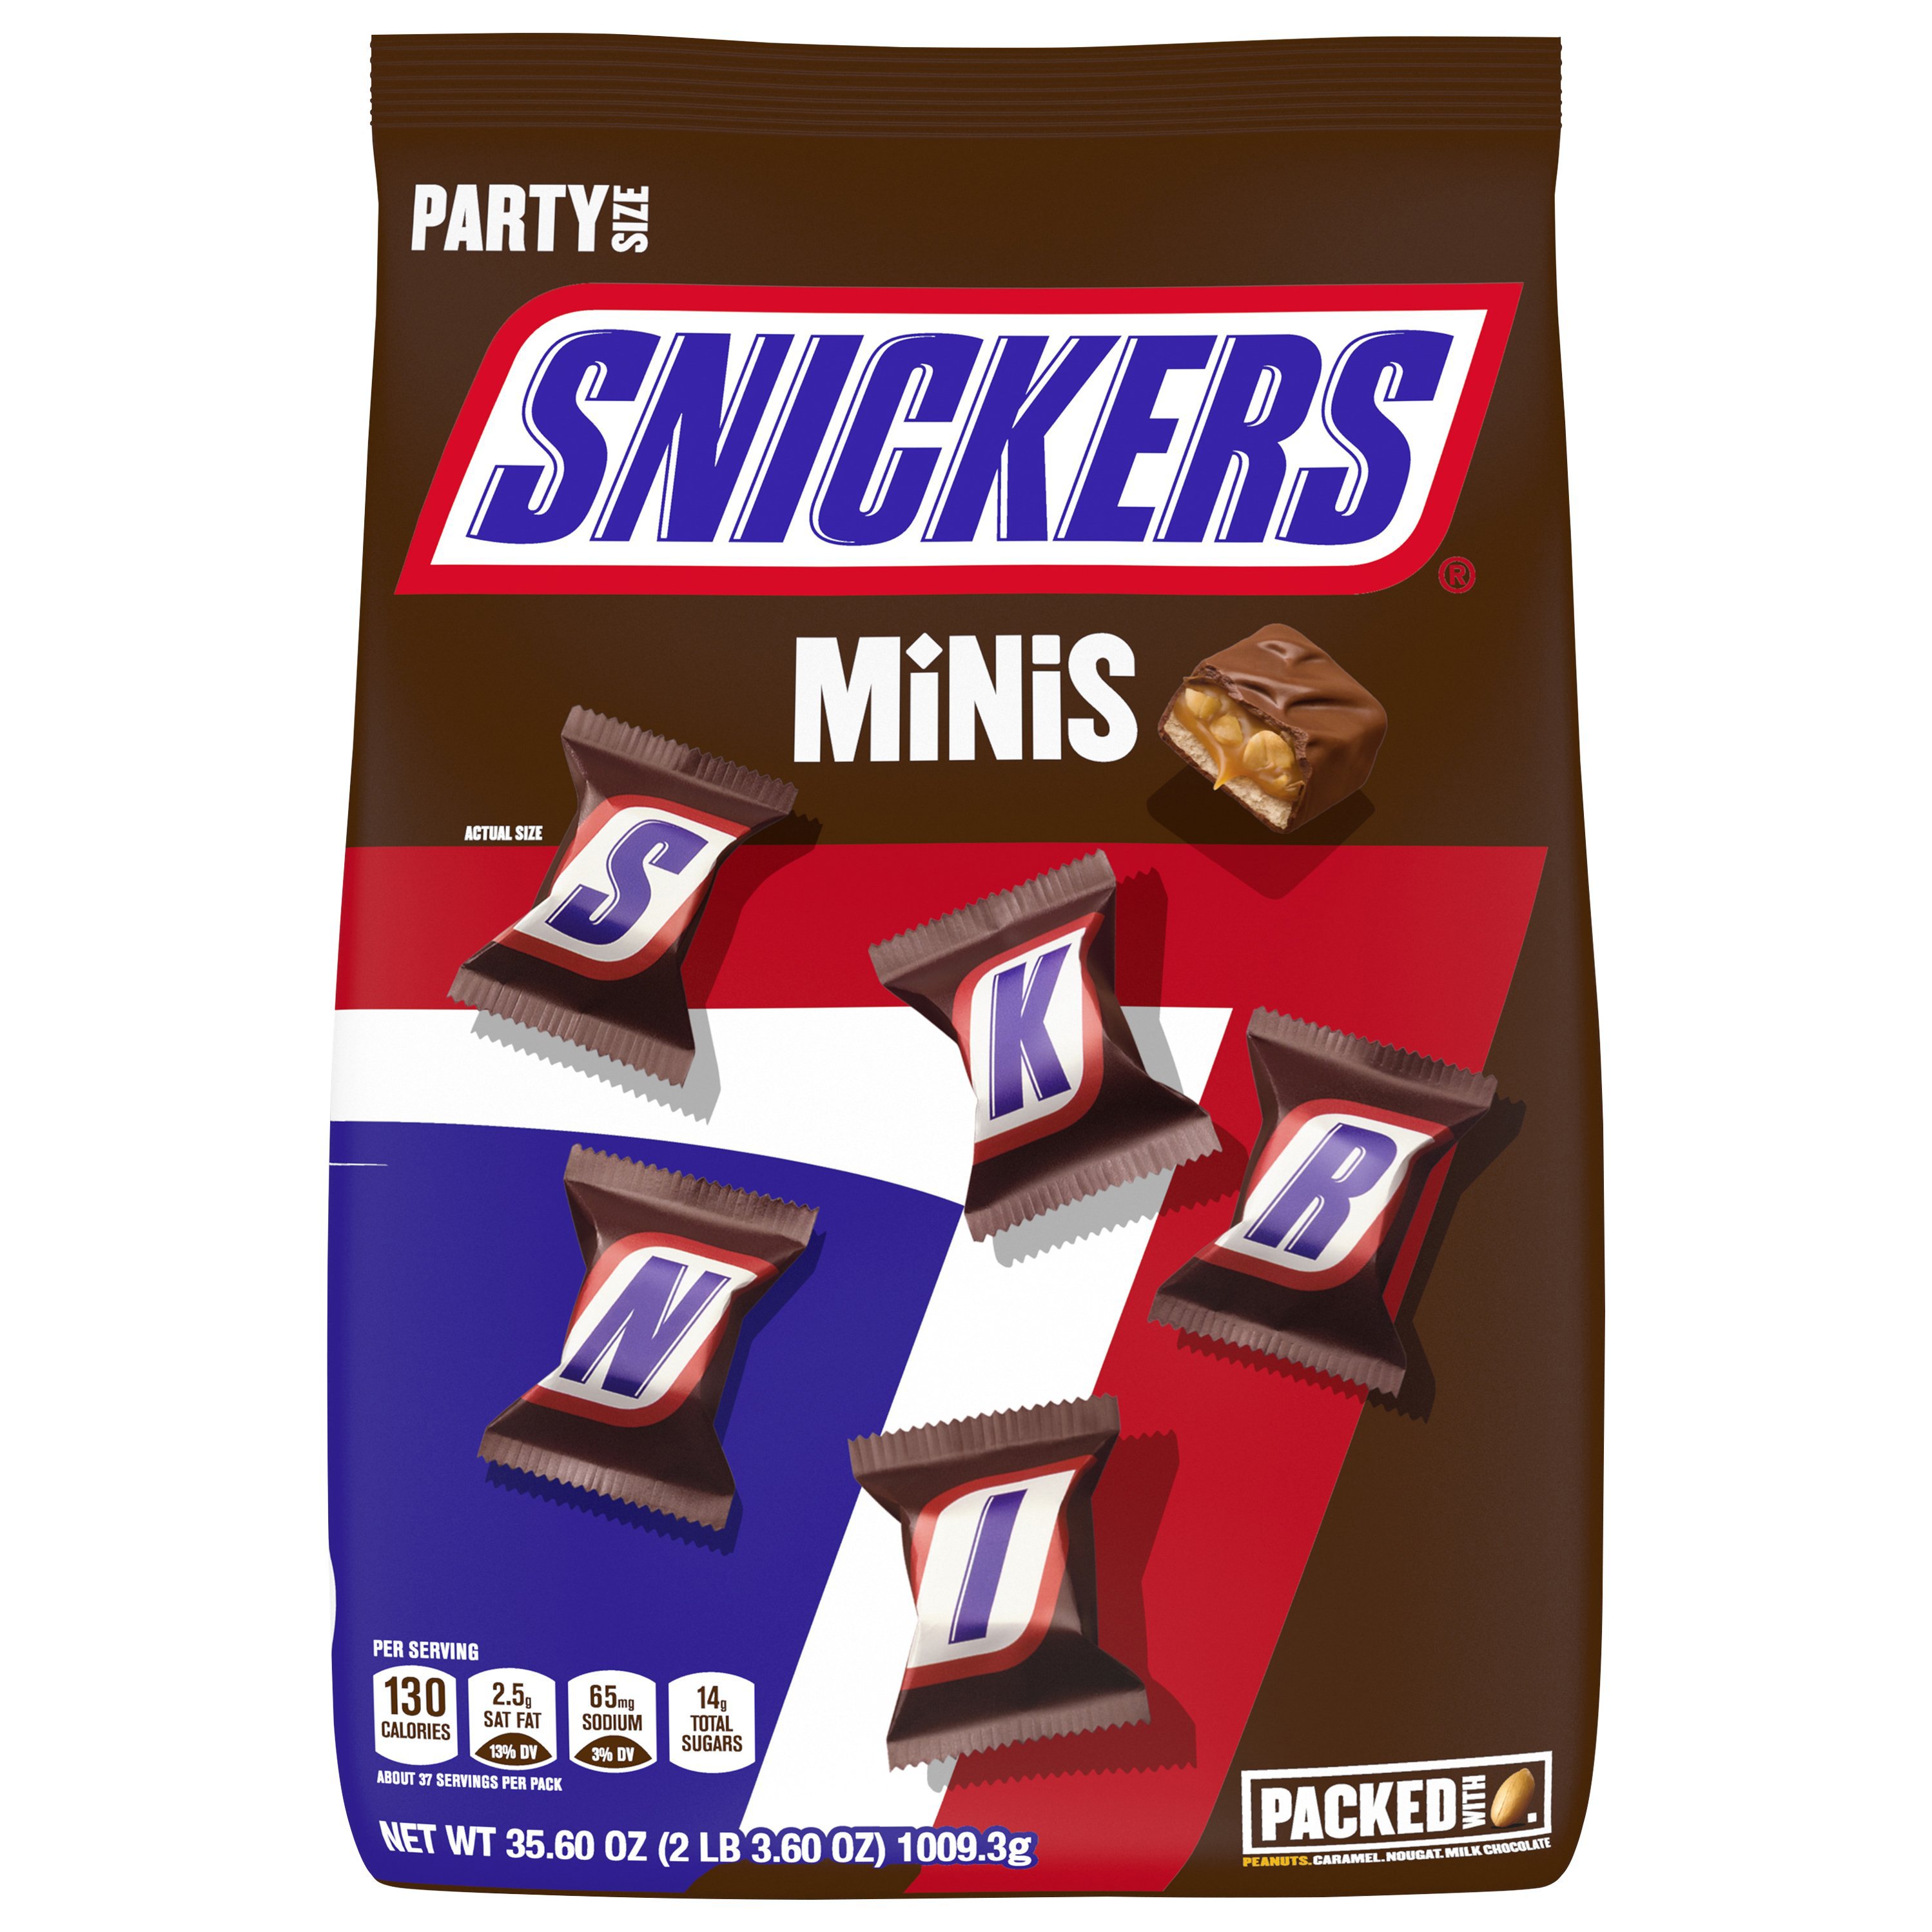 Snickers Candy Bars, Minis - 2.48 oz